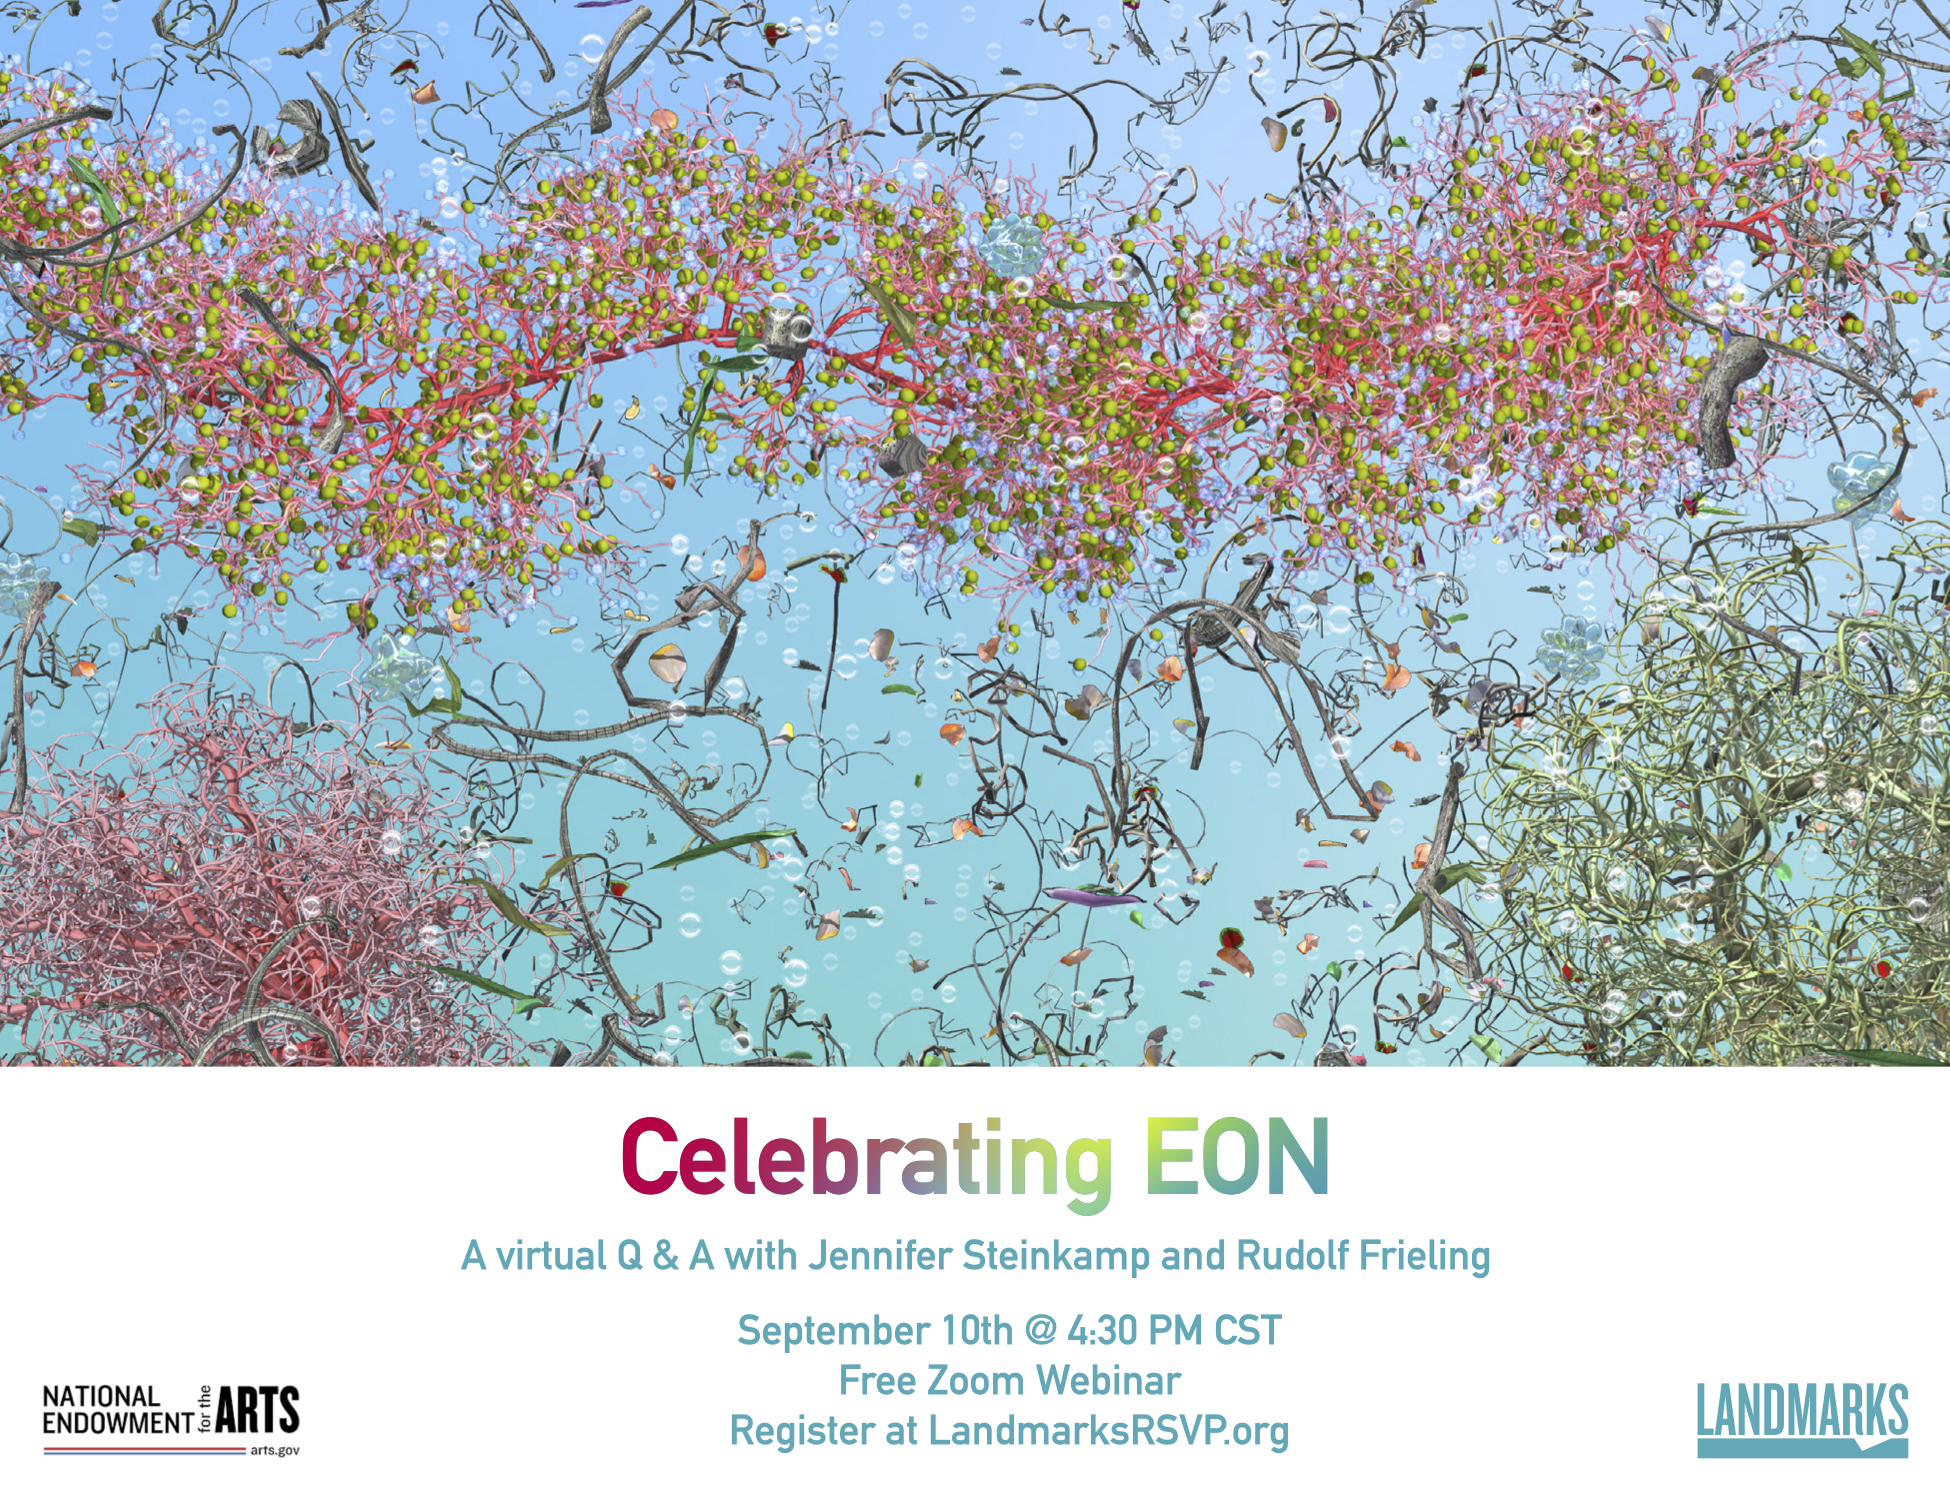 Promotional graphic for "Celebrating EON: A Virtual Q & A with Jennifer Steinkamp and Rudolf Frieling"